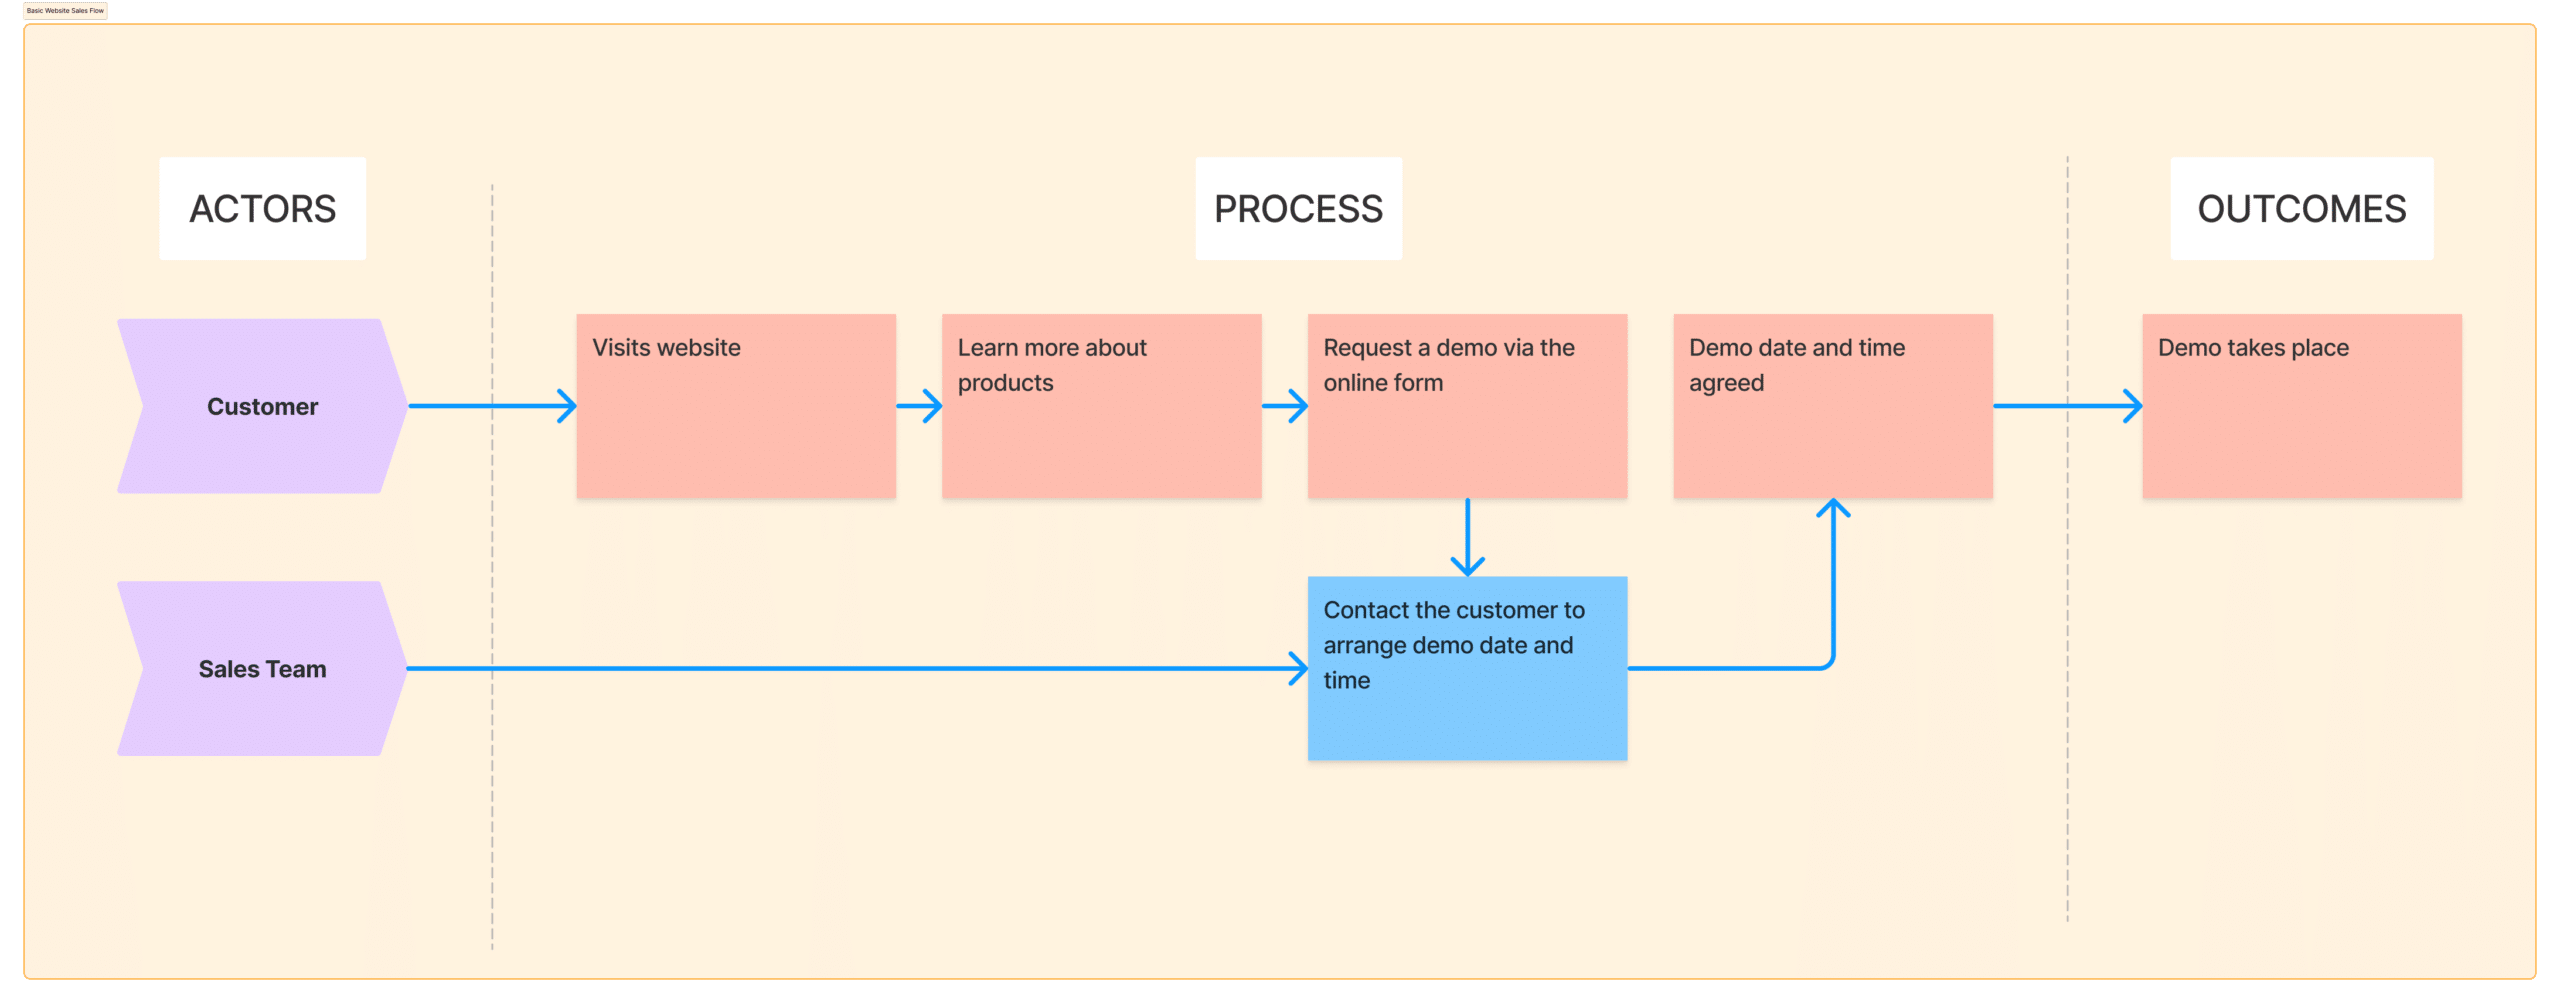 A basic sales flow displaying actors, actions and touchpoints towards the objective